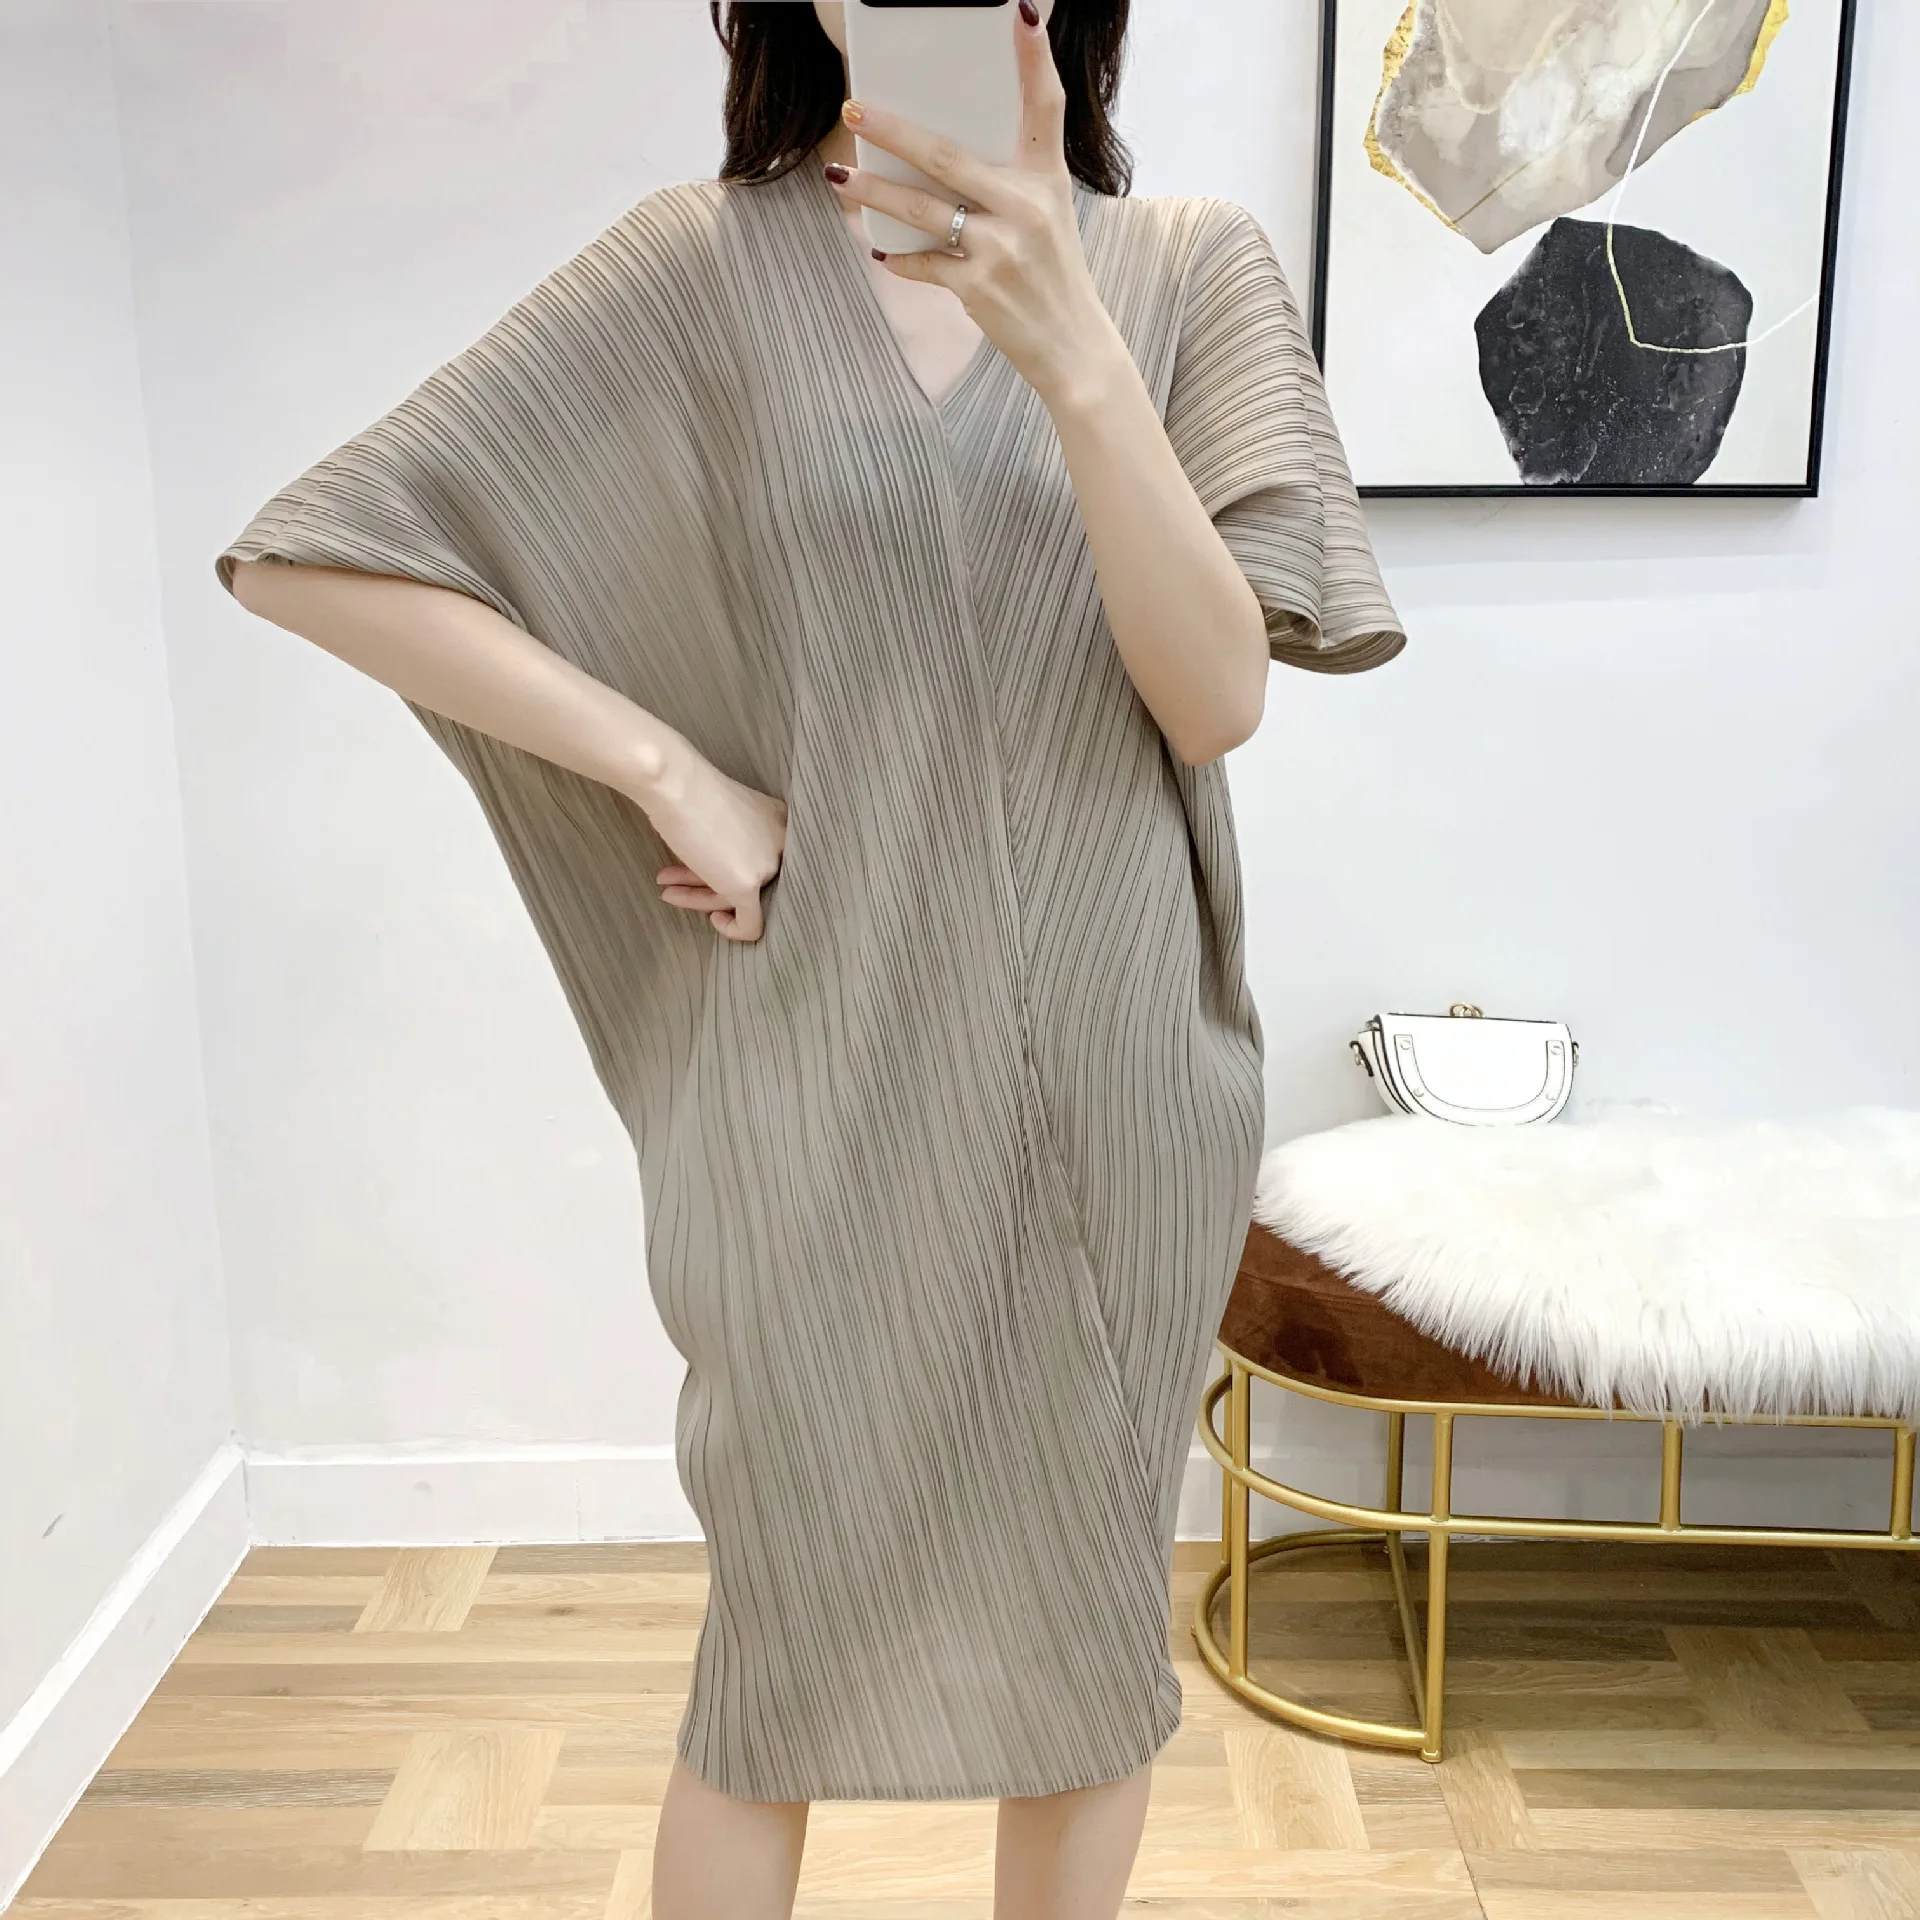 

Loose Fitting Women's Summer Bat Sleeve V-neck Casual Lazy Covering Flesh Appearing Slim Mid Length Versatile Three House Dress